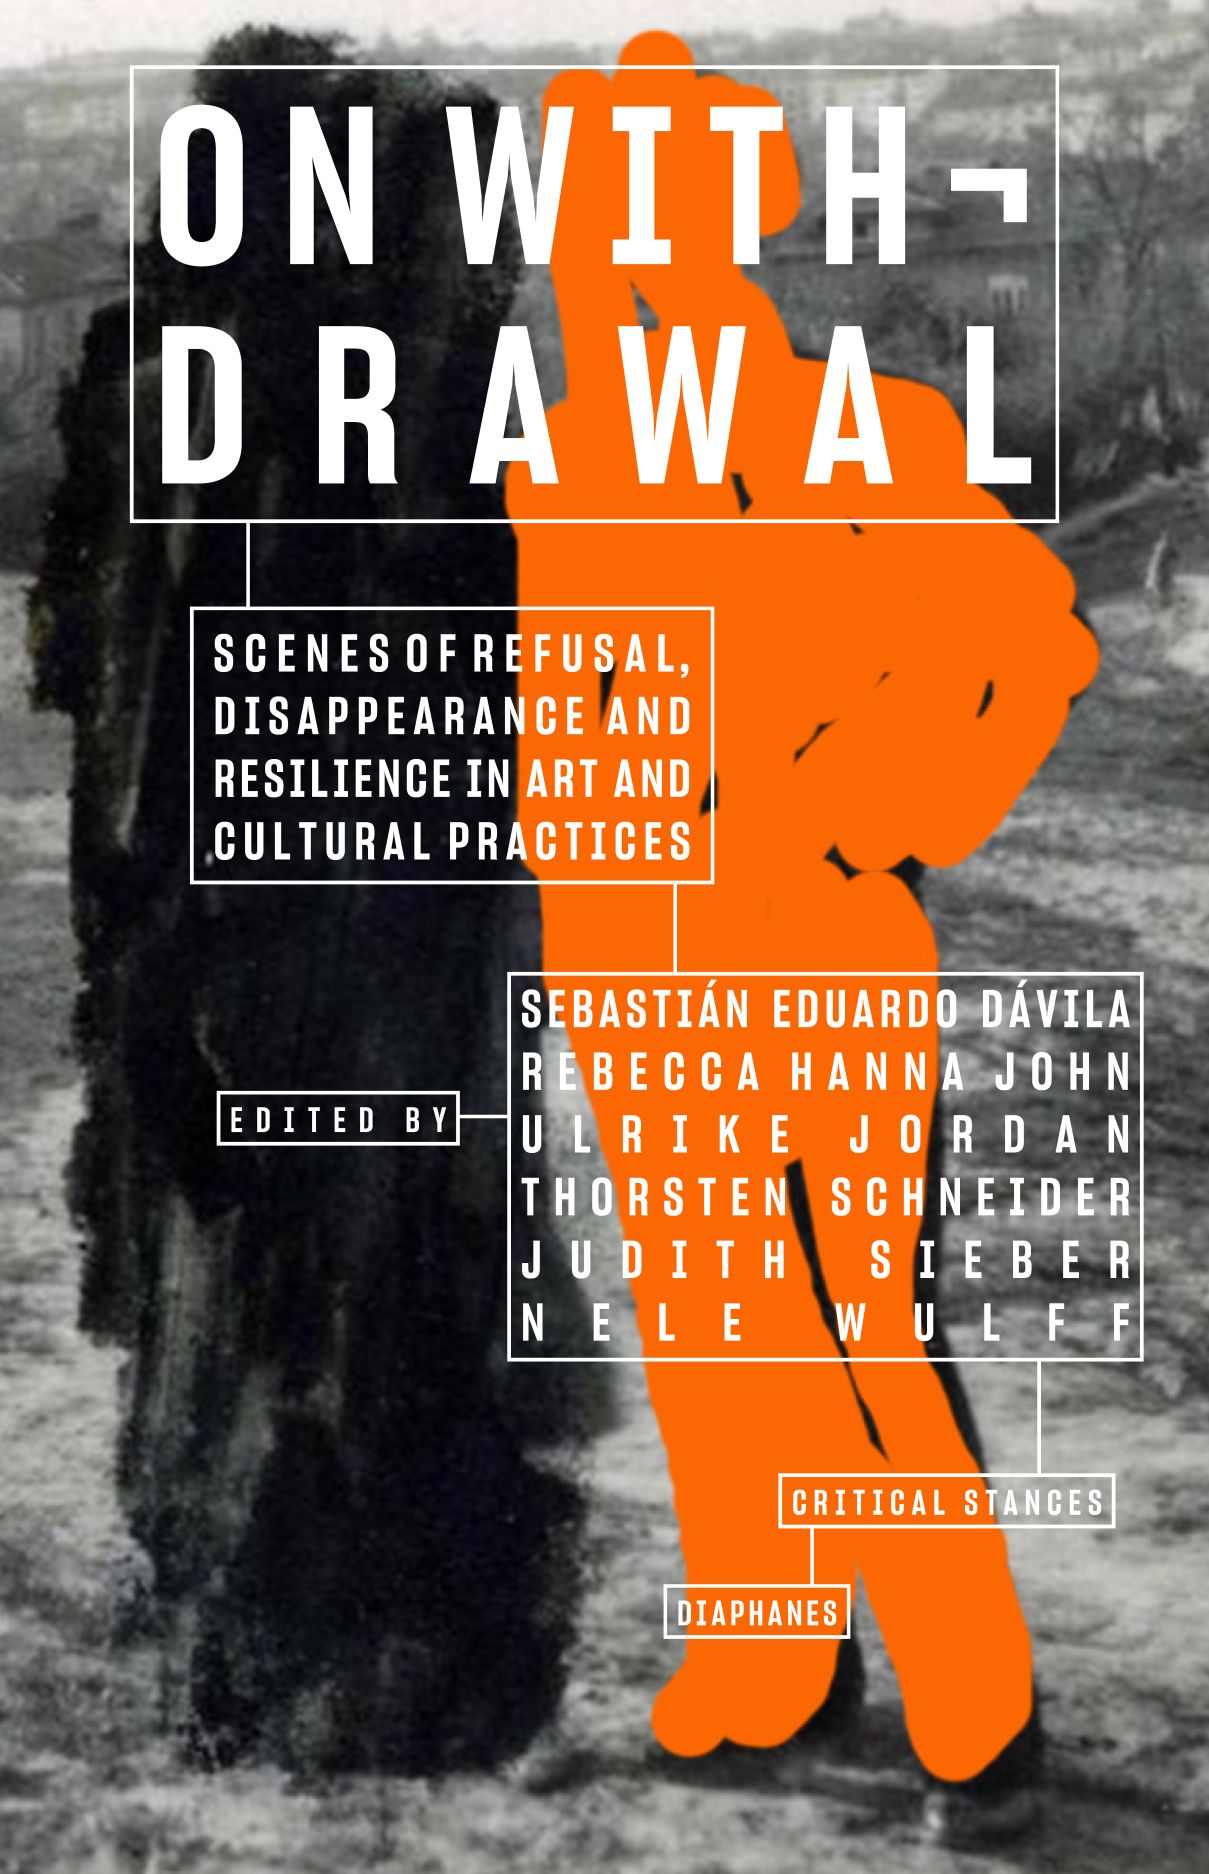 Cover of the book, On Withdrawal